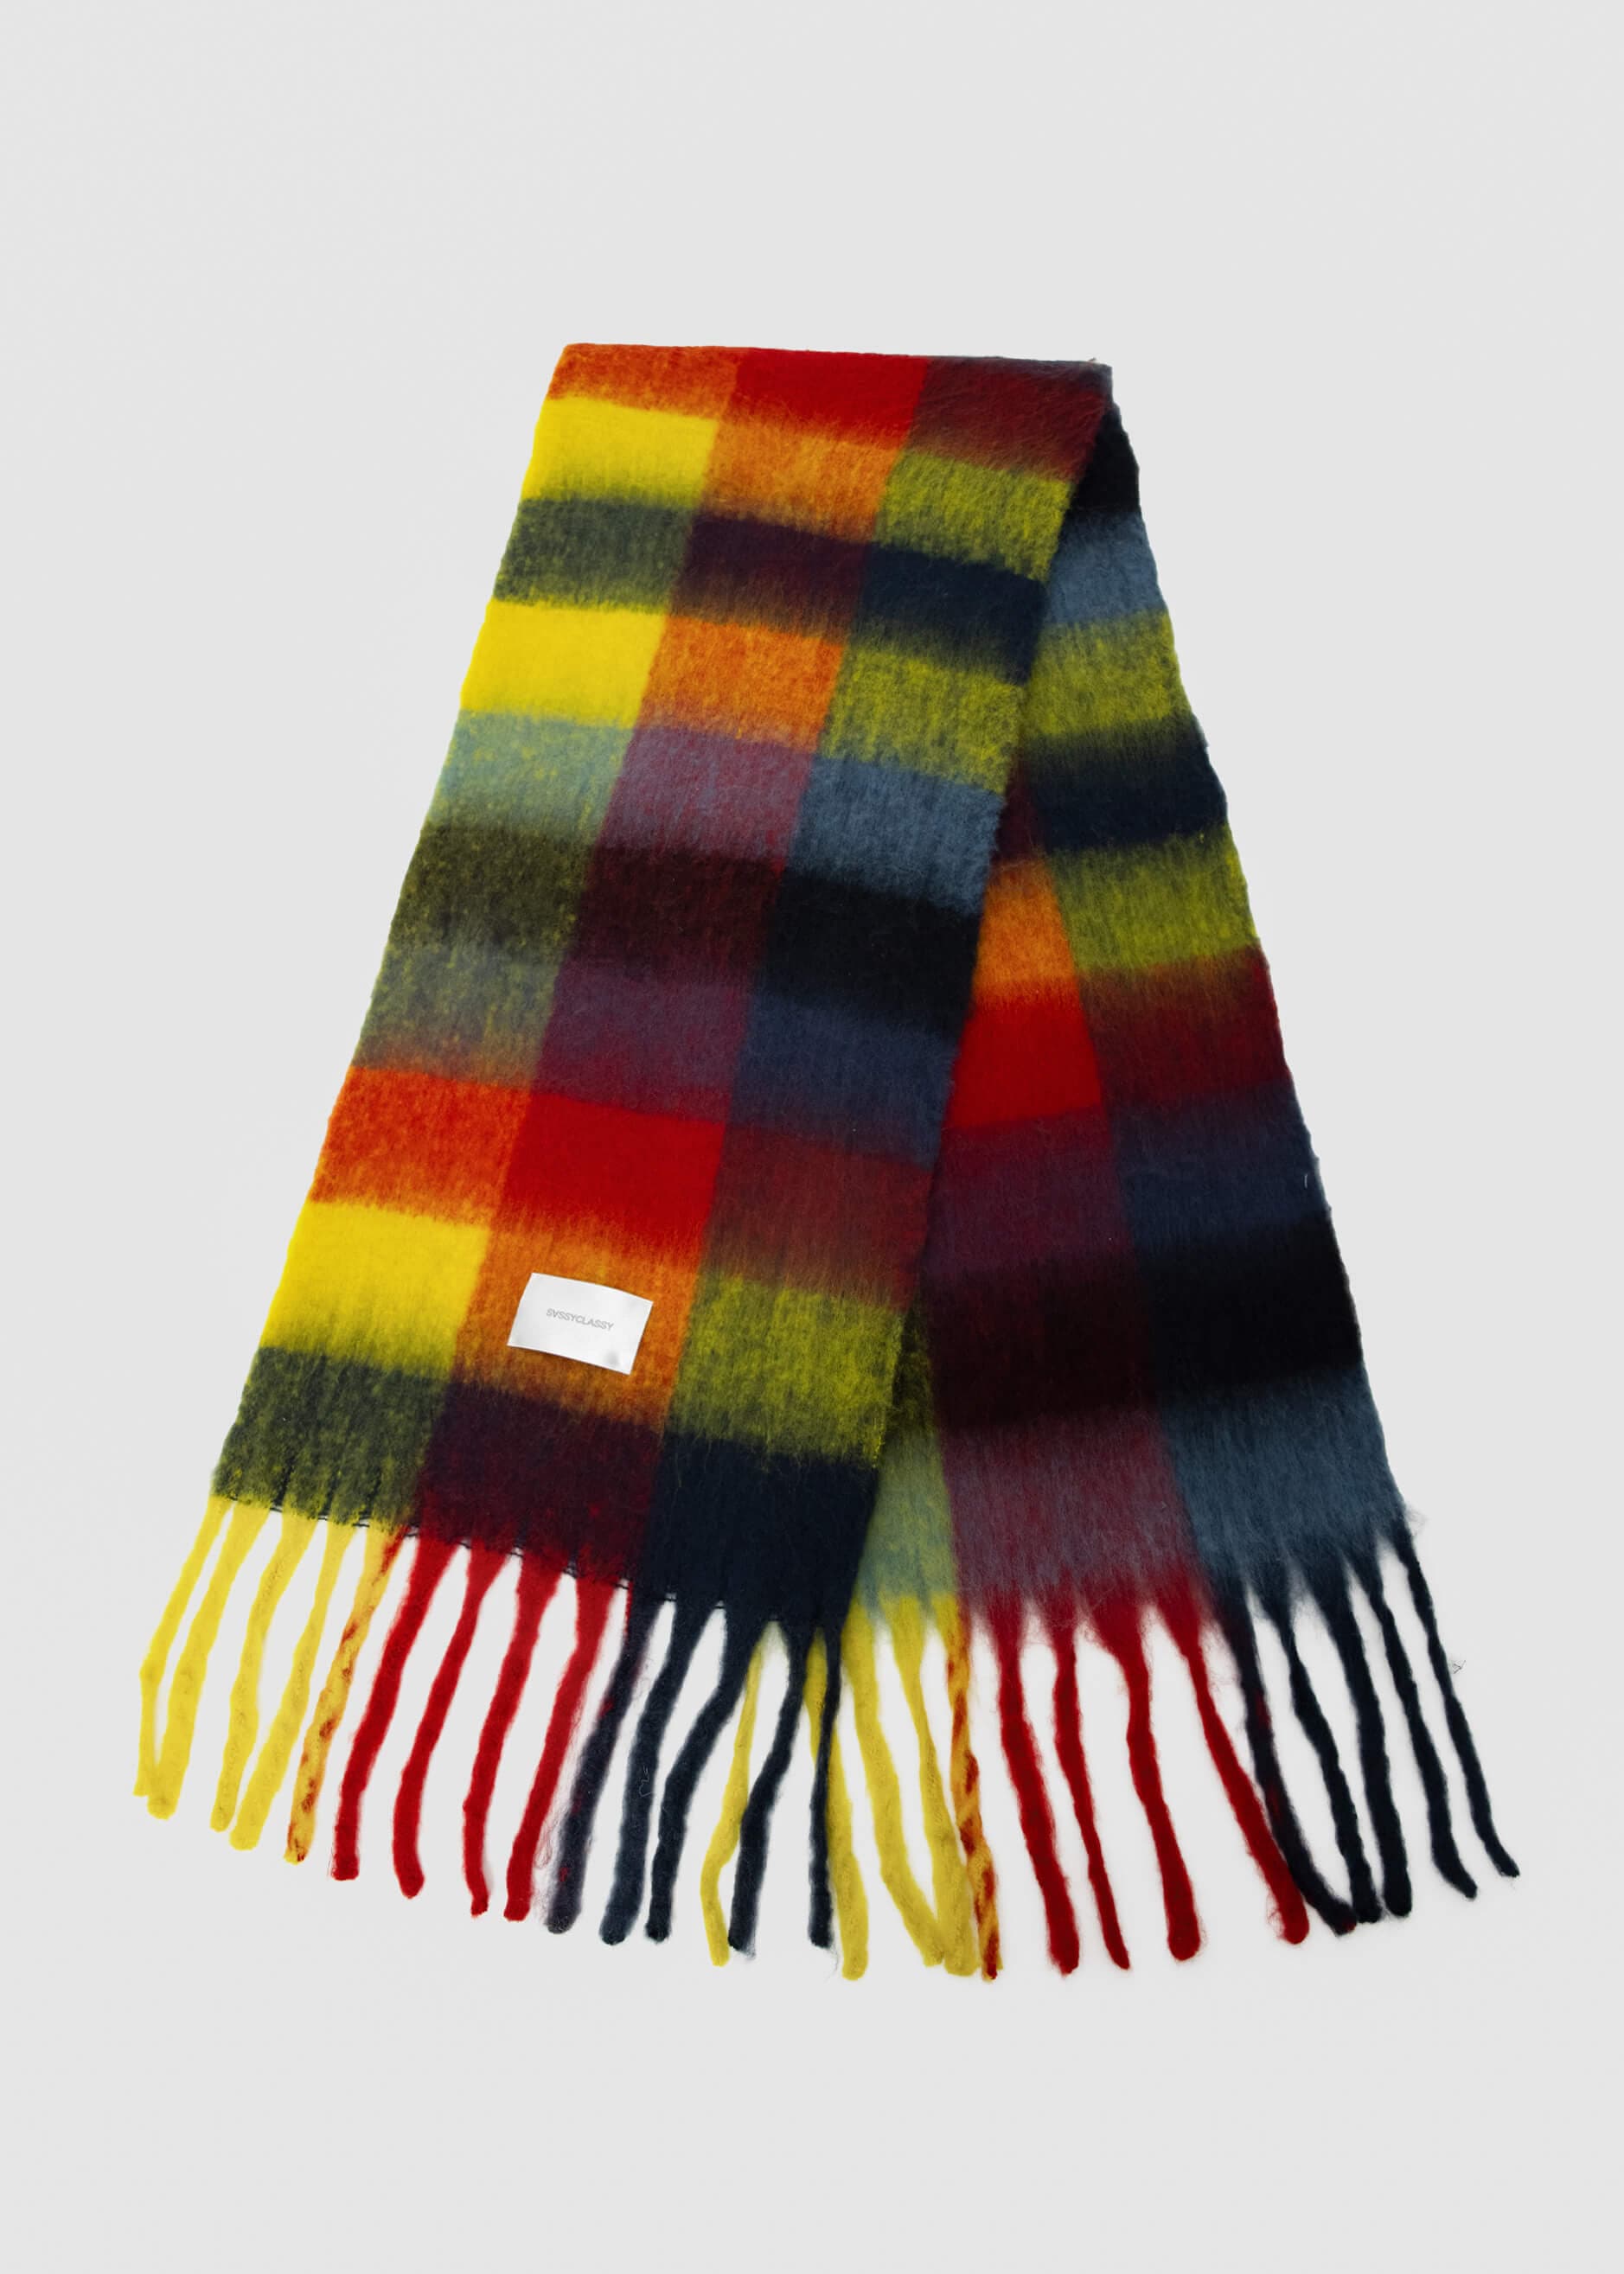 Bunter, karierter Schal- rot | Hats and scarves | Accessoires